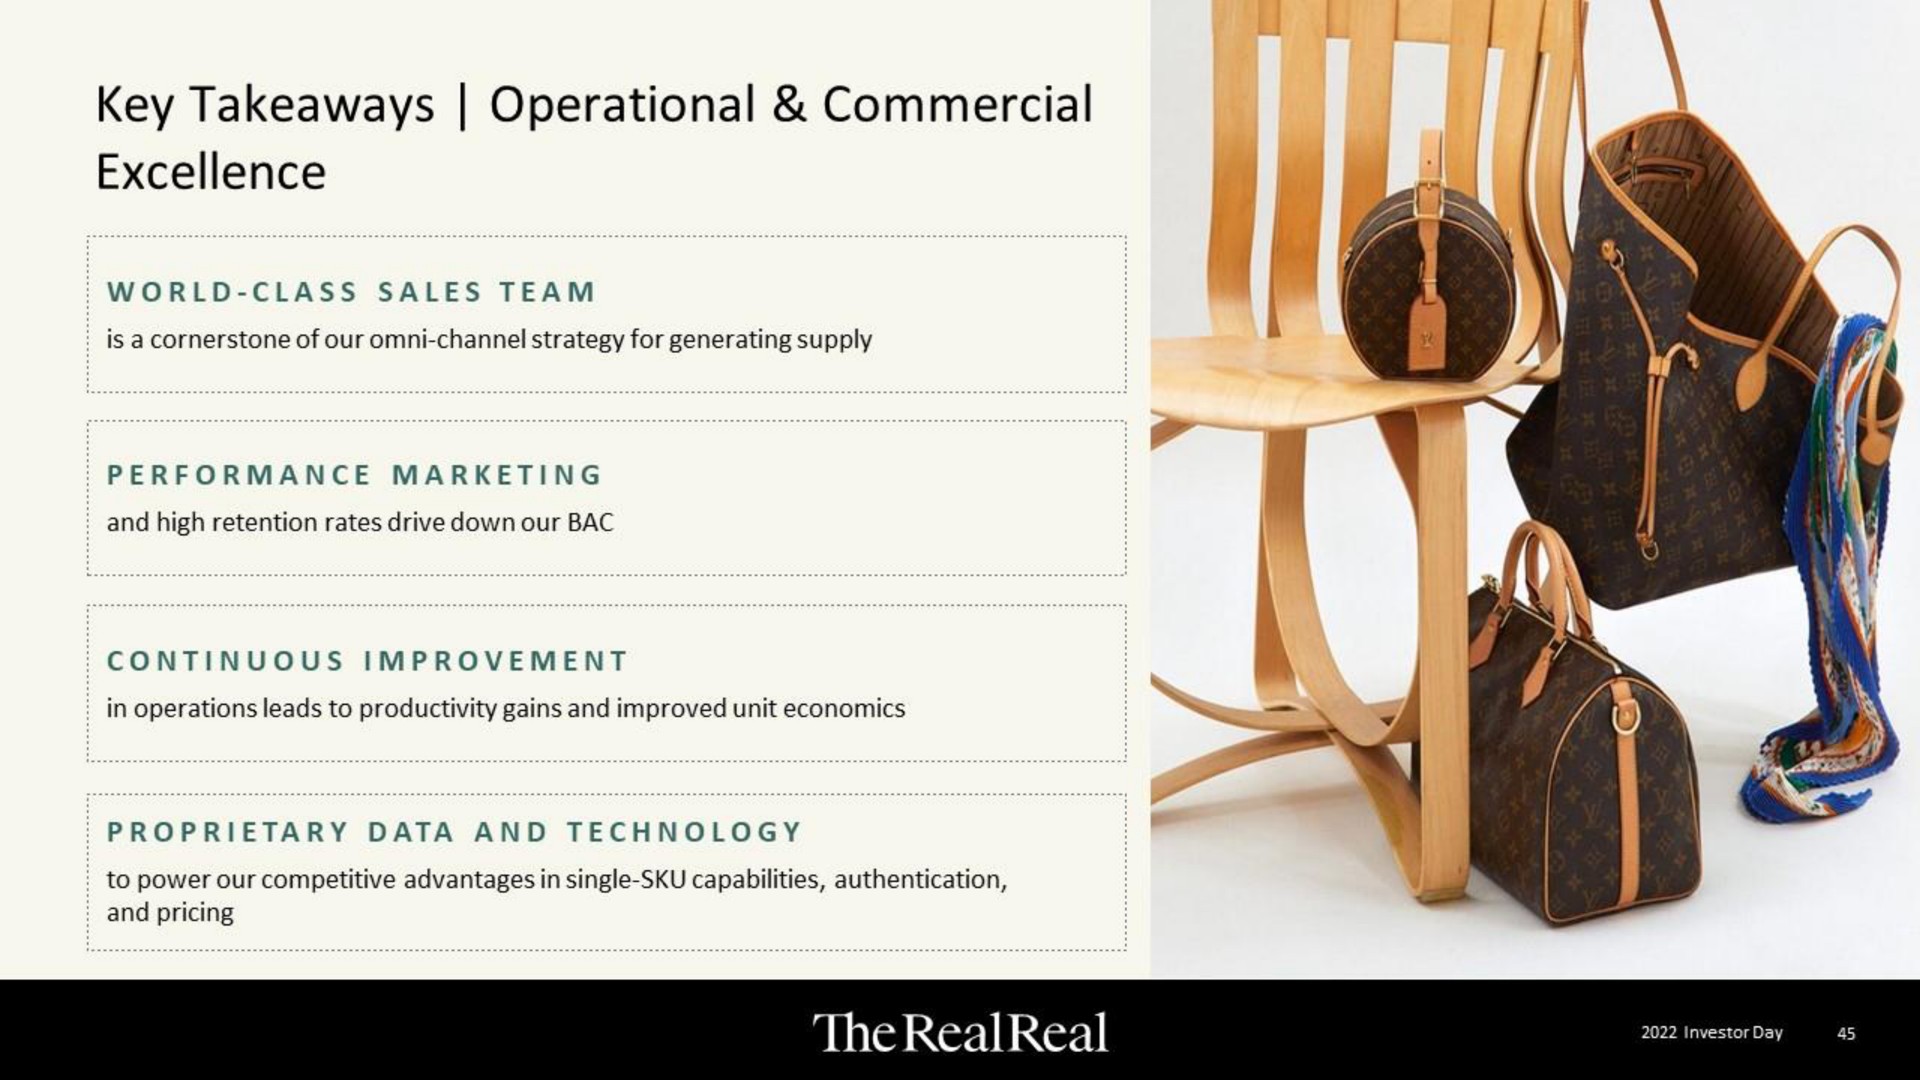 key operational commercial excellence | The RealReal